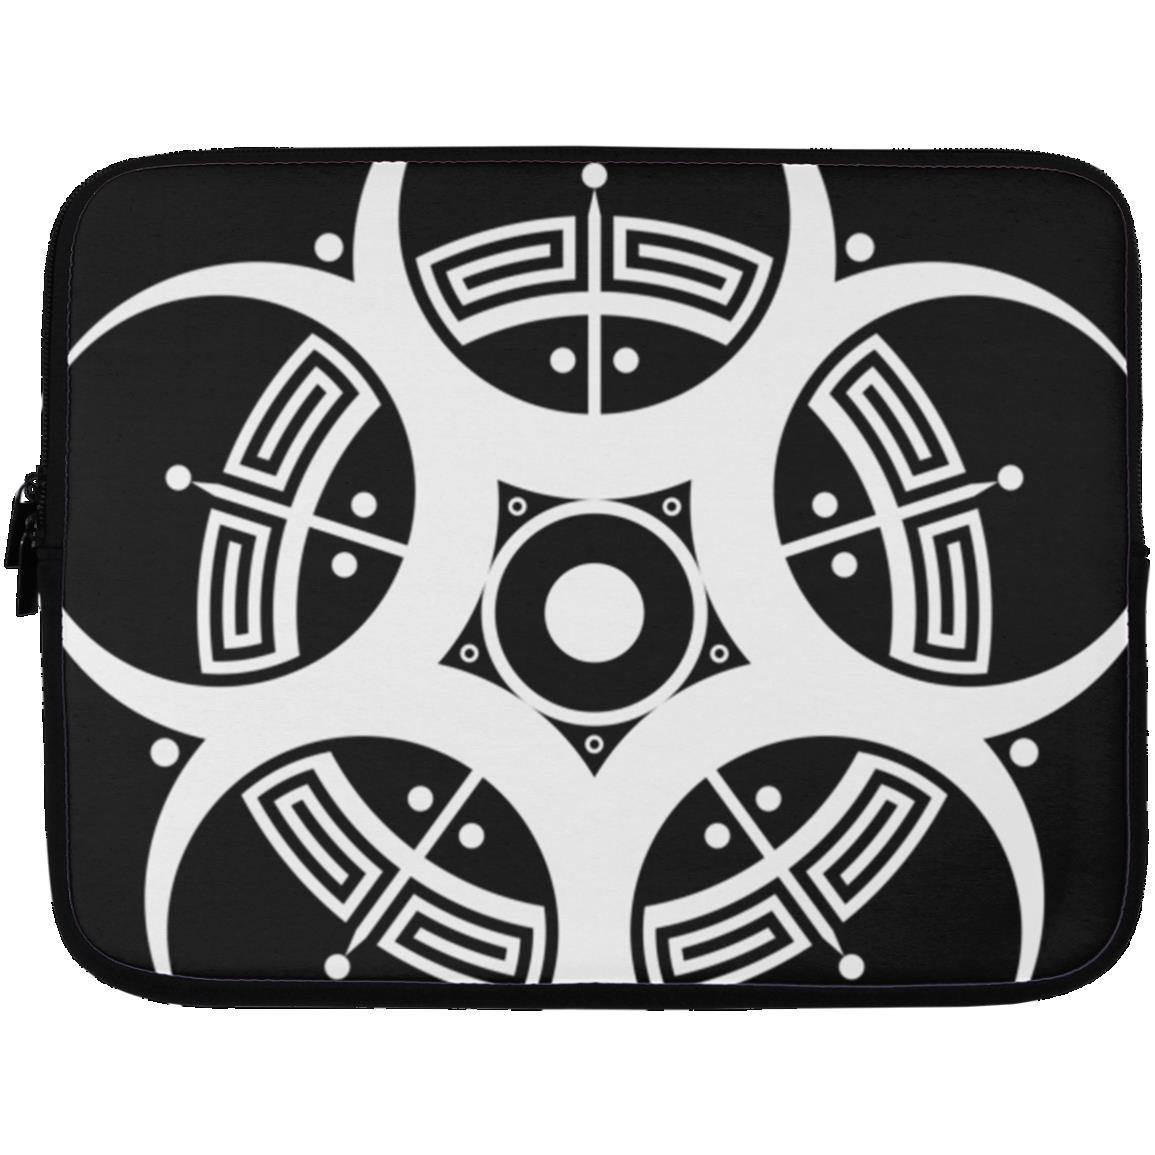 Crop Circle Laptop Sleeve - Roundway Hill 2 - Shapes of Wisdom